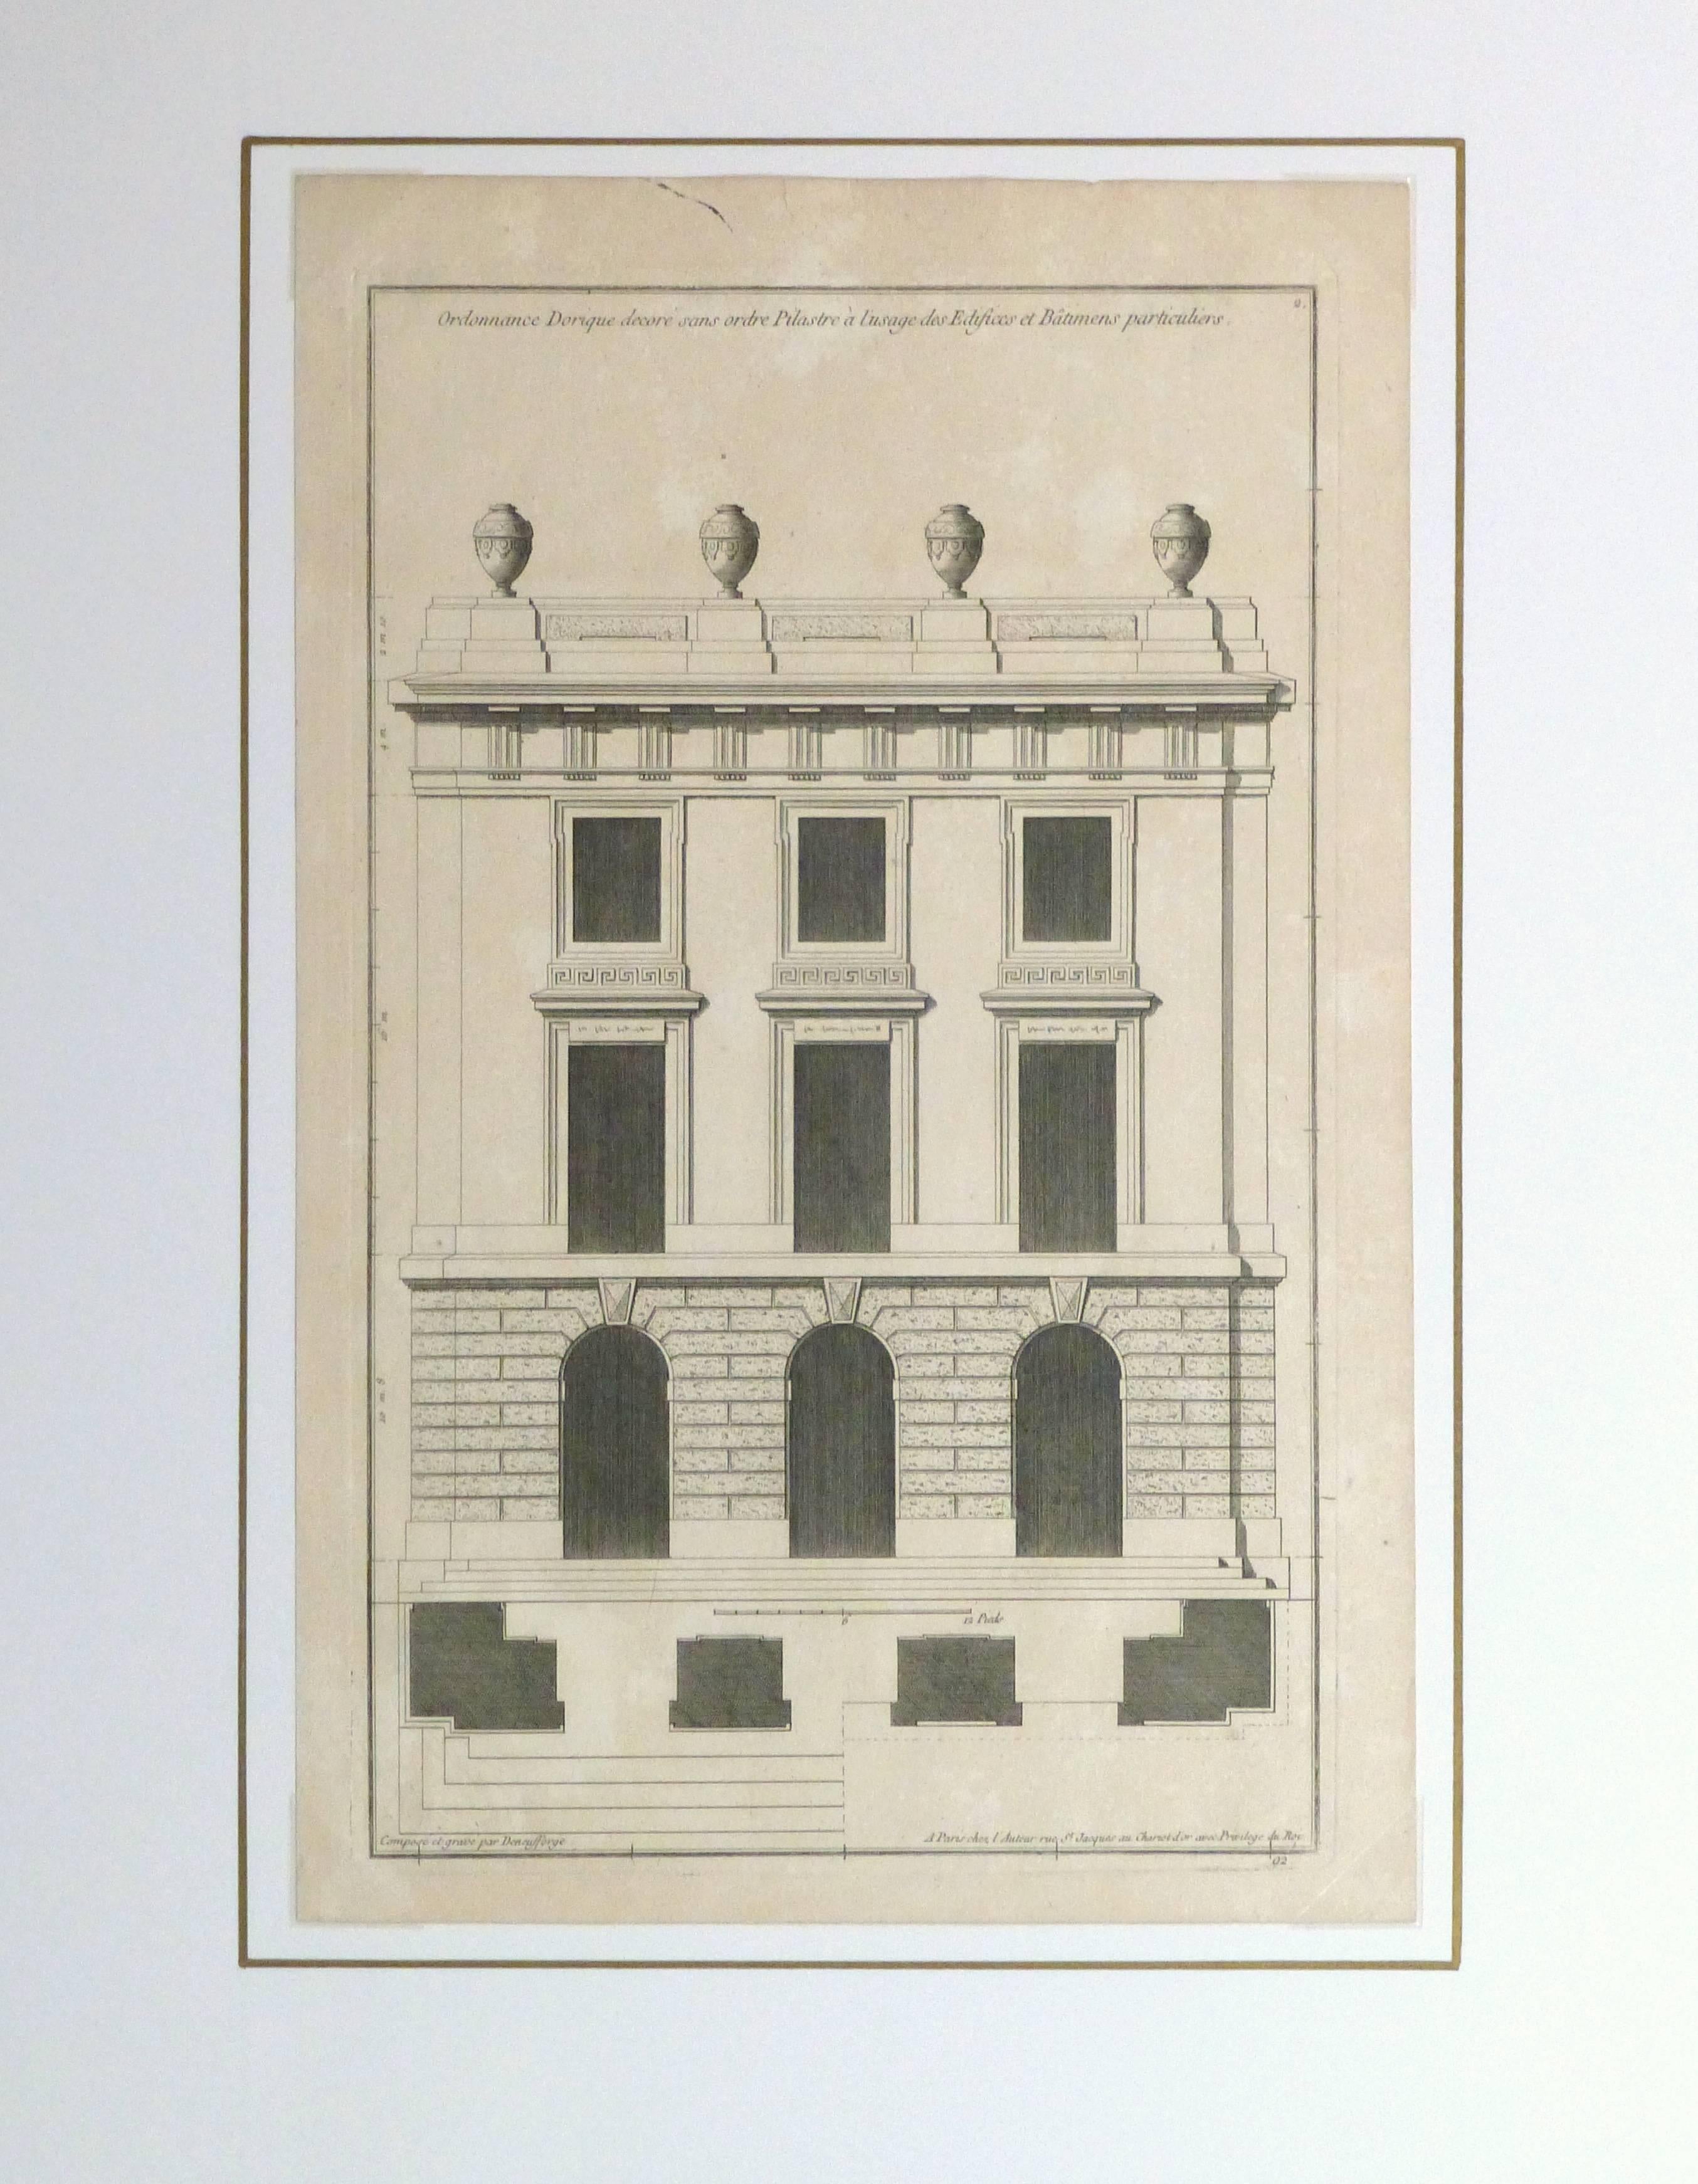 Beautifully-detailed antique copper engraving depicting a traditional building in the Doric Order architectural style from Recueil d'Architecture, 1780.

Original artwork on paper displayed on a white mat with a gold border. Archival plastic sleeve